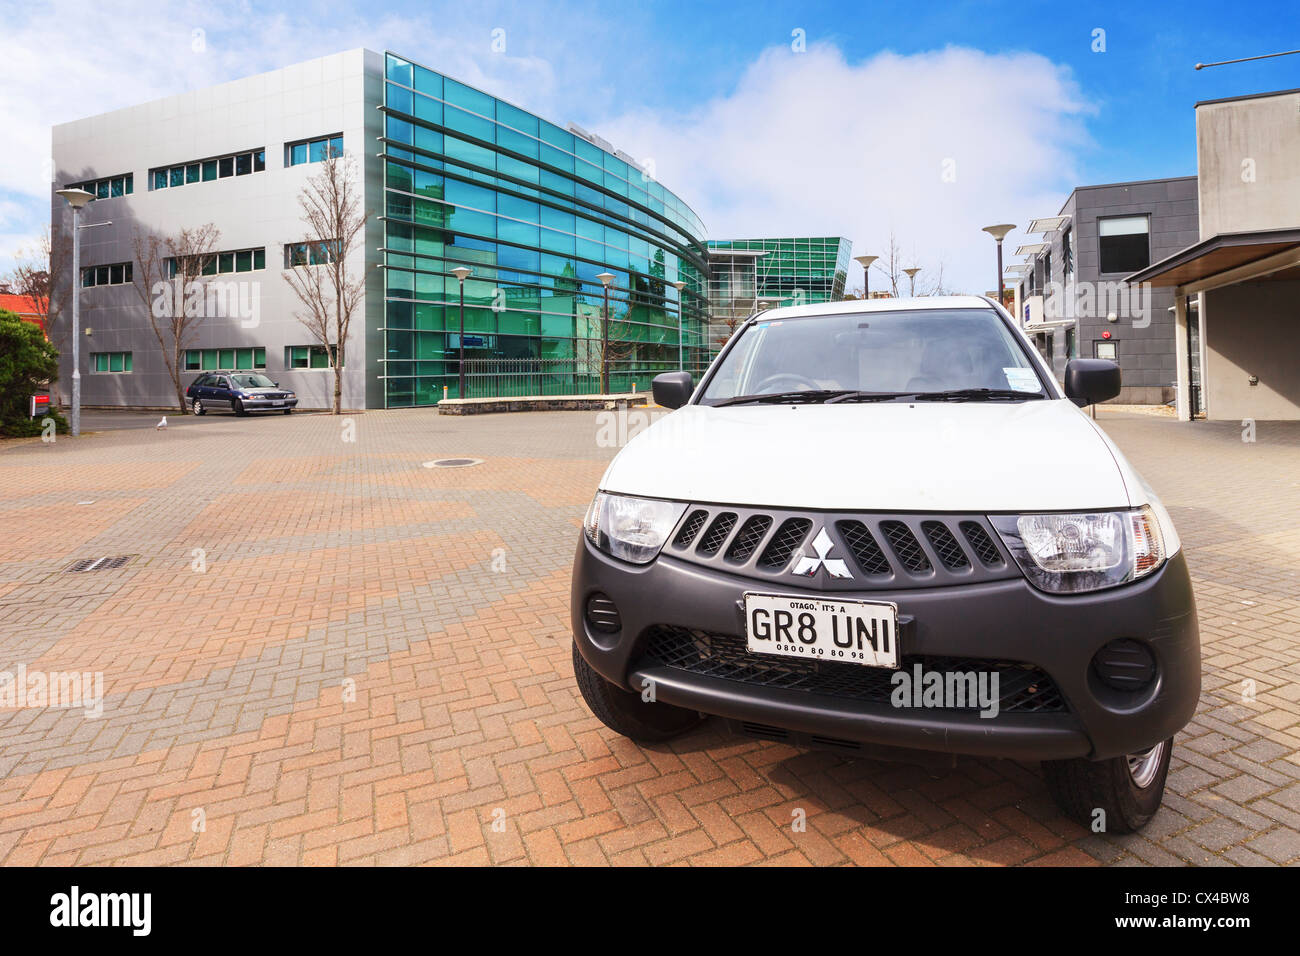 Mitsubishi Triton of the Campus Watch, Otago University's security, with the number plate GR8 UNI, Stock Photo